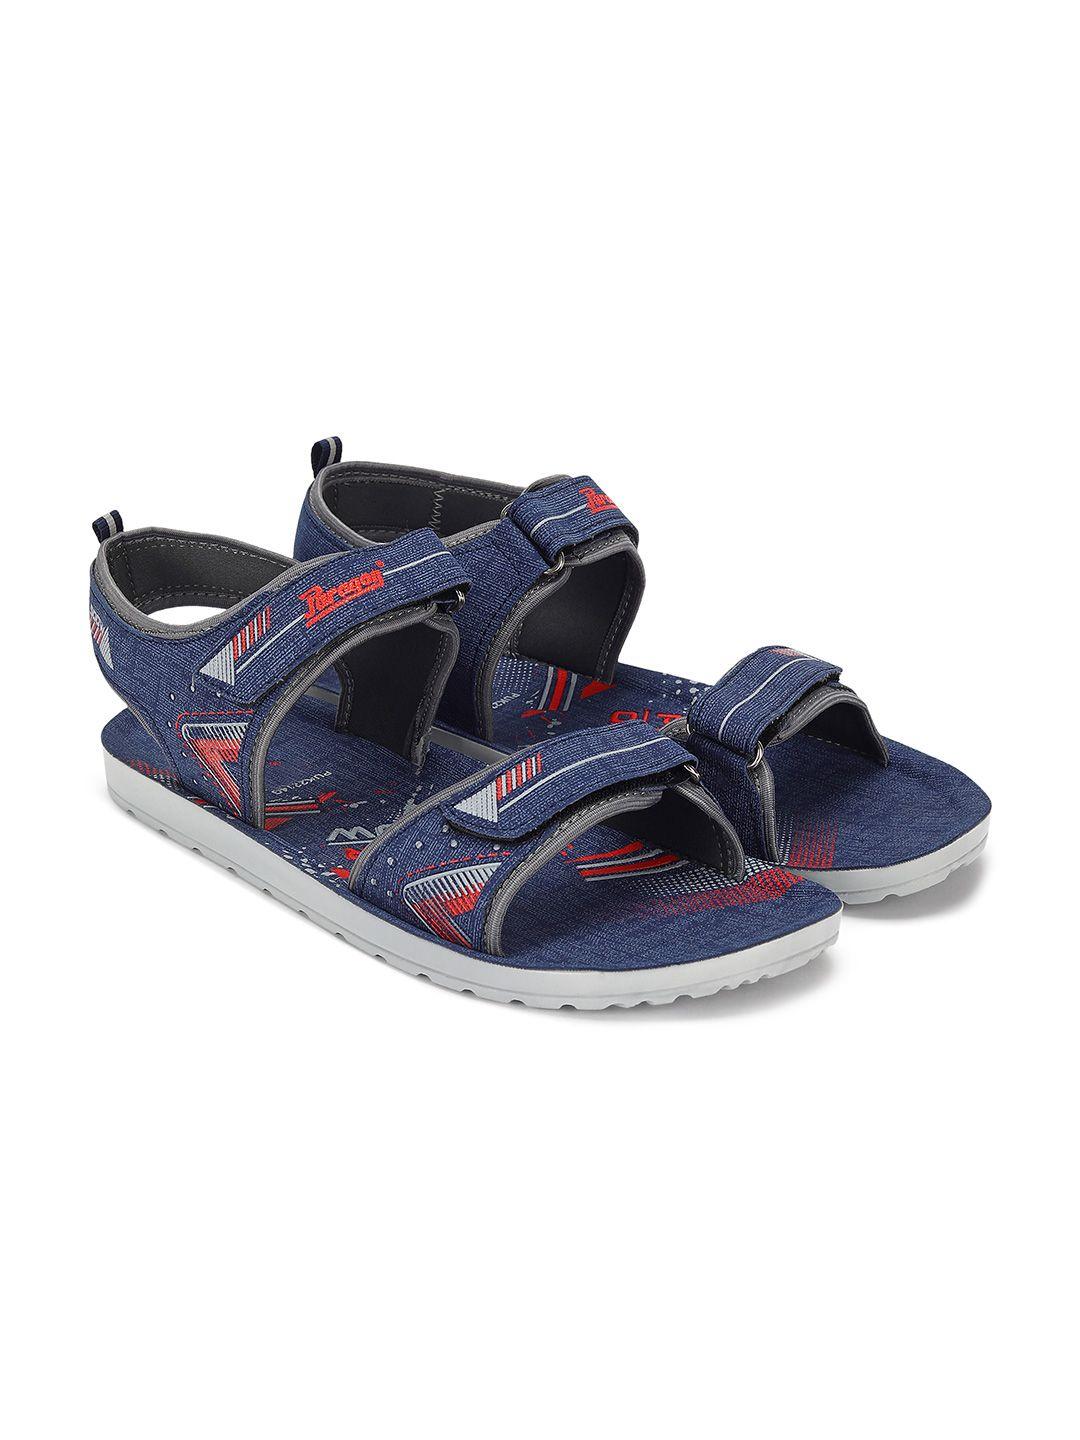 paragon-men-lightweight-daily-durable-comfortable-sports-sandals